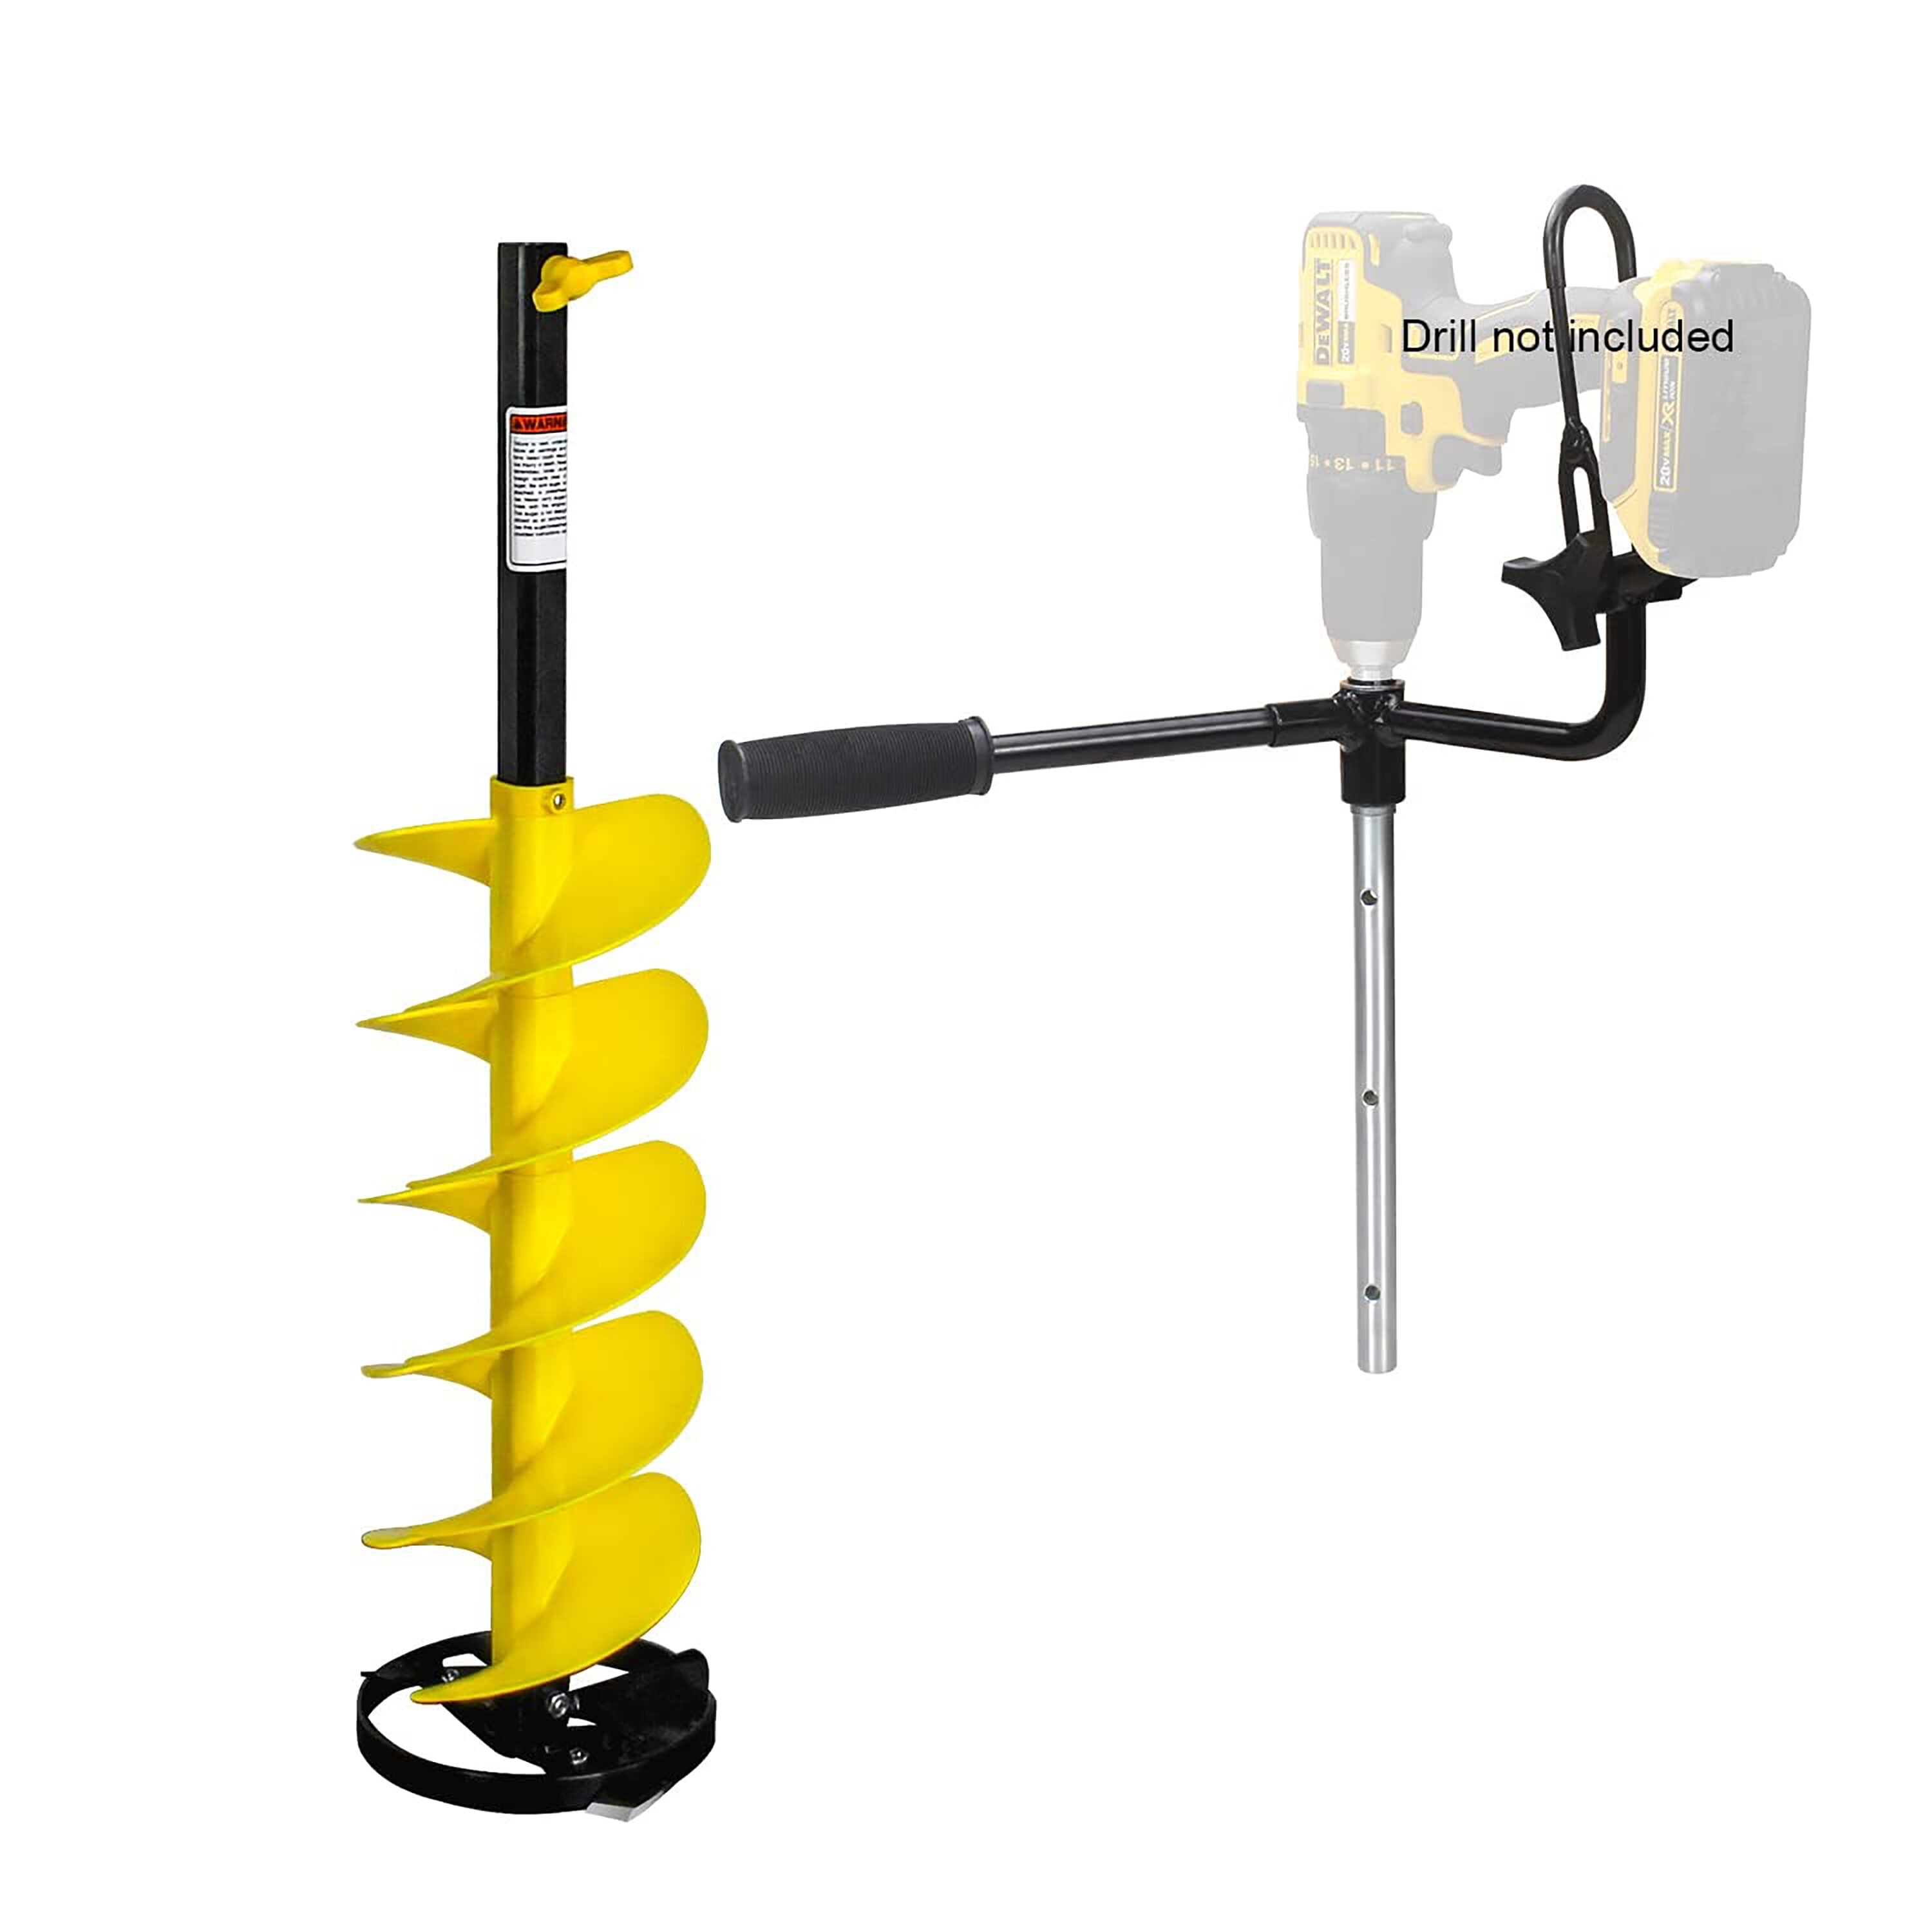 Wuzstar Ice Drill Auger Cordless Electric Ice Fishing Auger with Centering Blade, 8 Ice Drill Bit with Bit Adapter and Top Plate